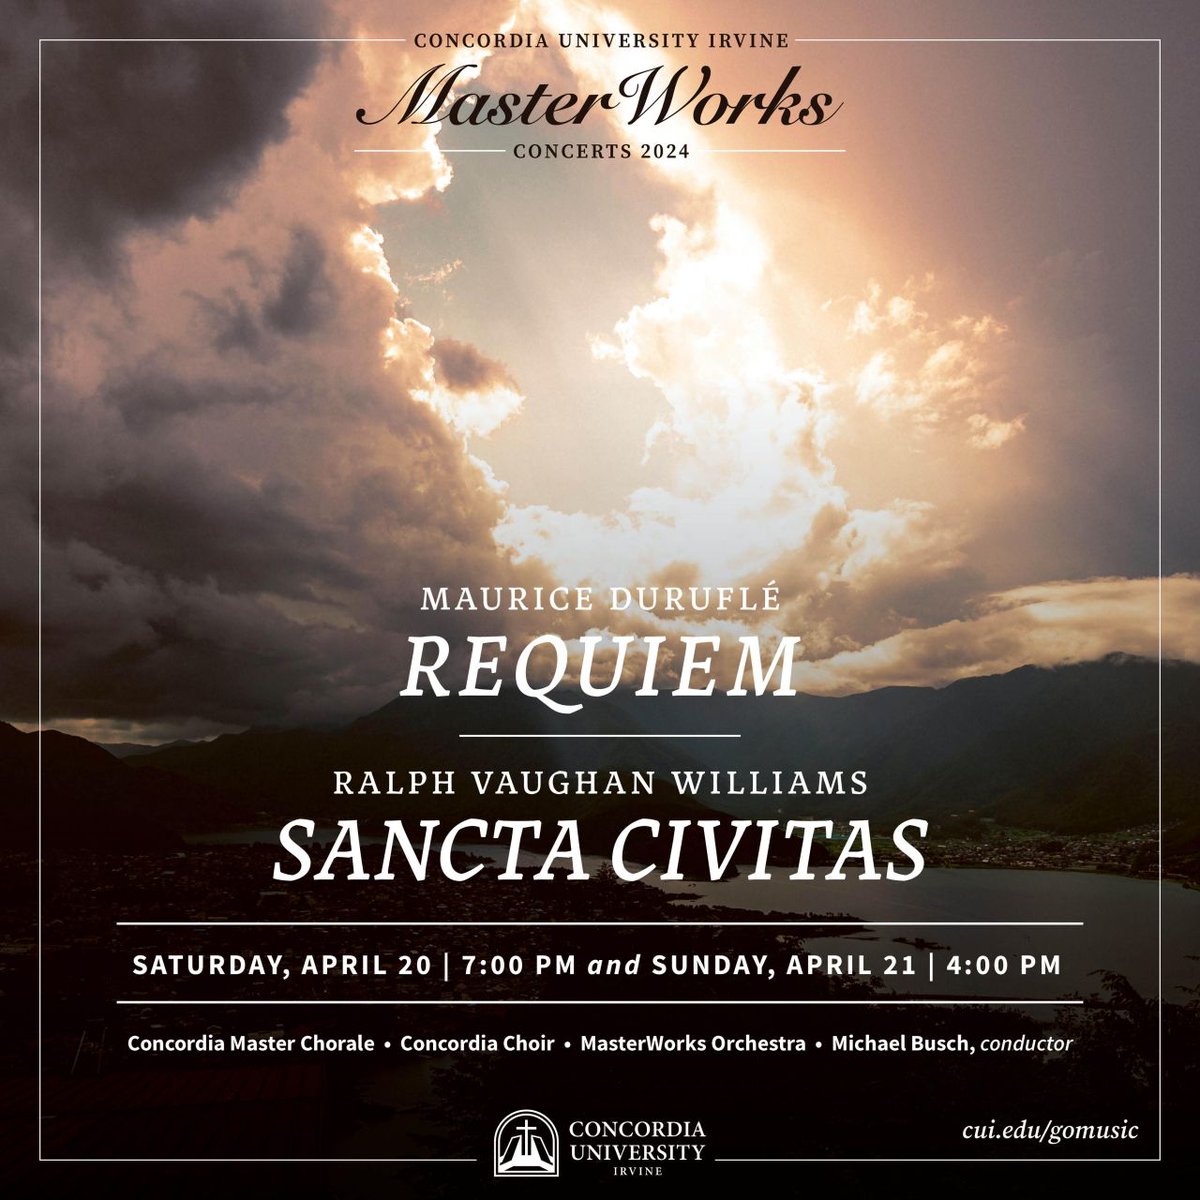 Experience one of the most memorable events of the year at the Concordia MasterWorks Concerts featuring Duruflé's ethereal Requiem and Vaughan Williams' majestic Sancta Civitas. Join us on April 20 & 21: bit.ly/49nem4q